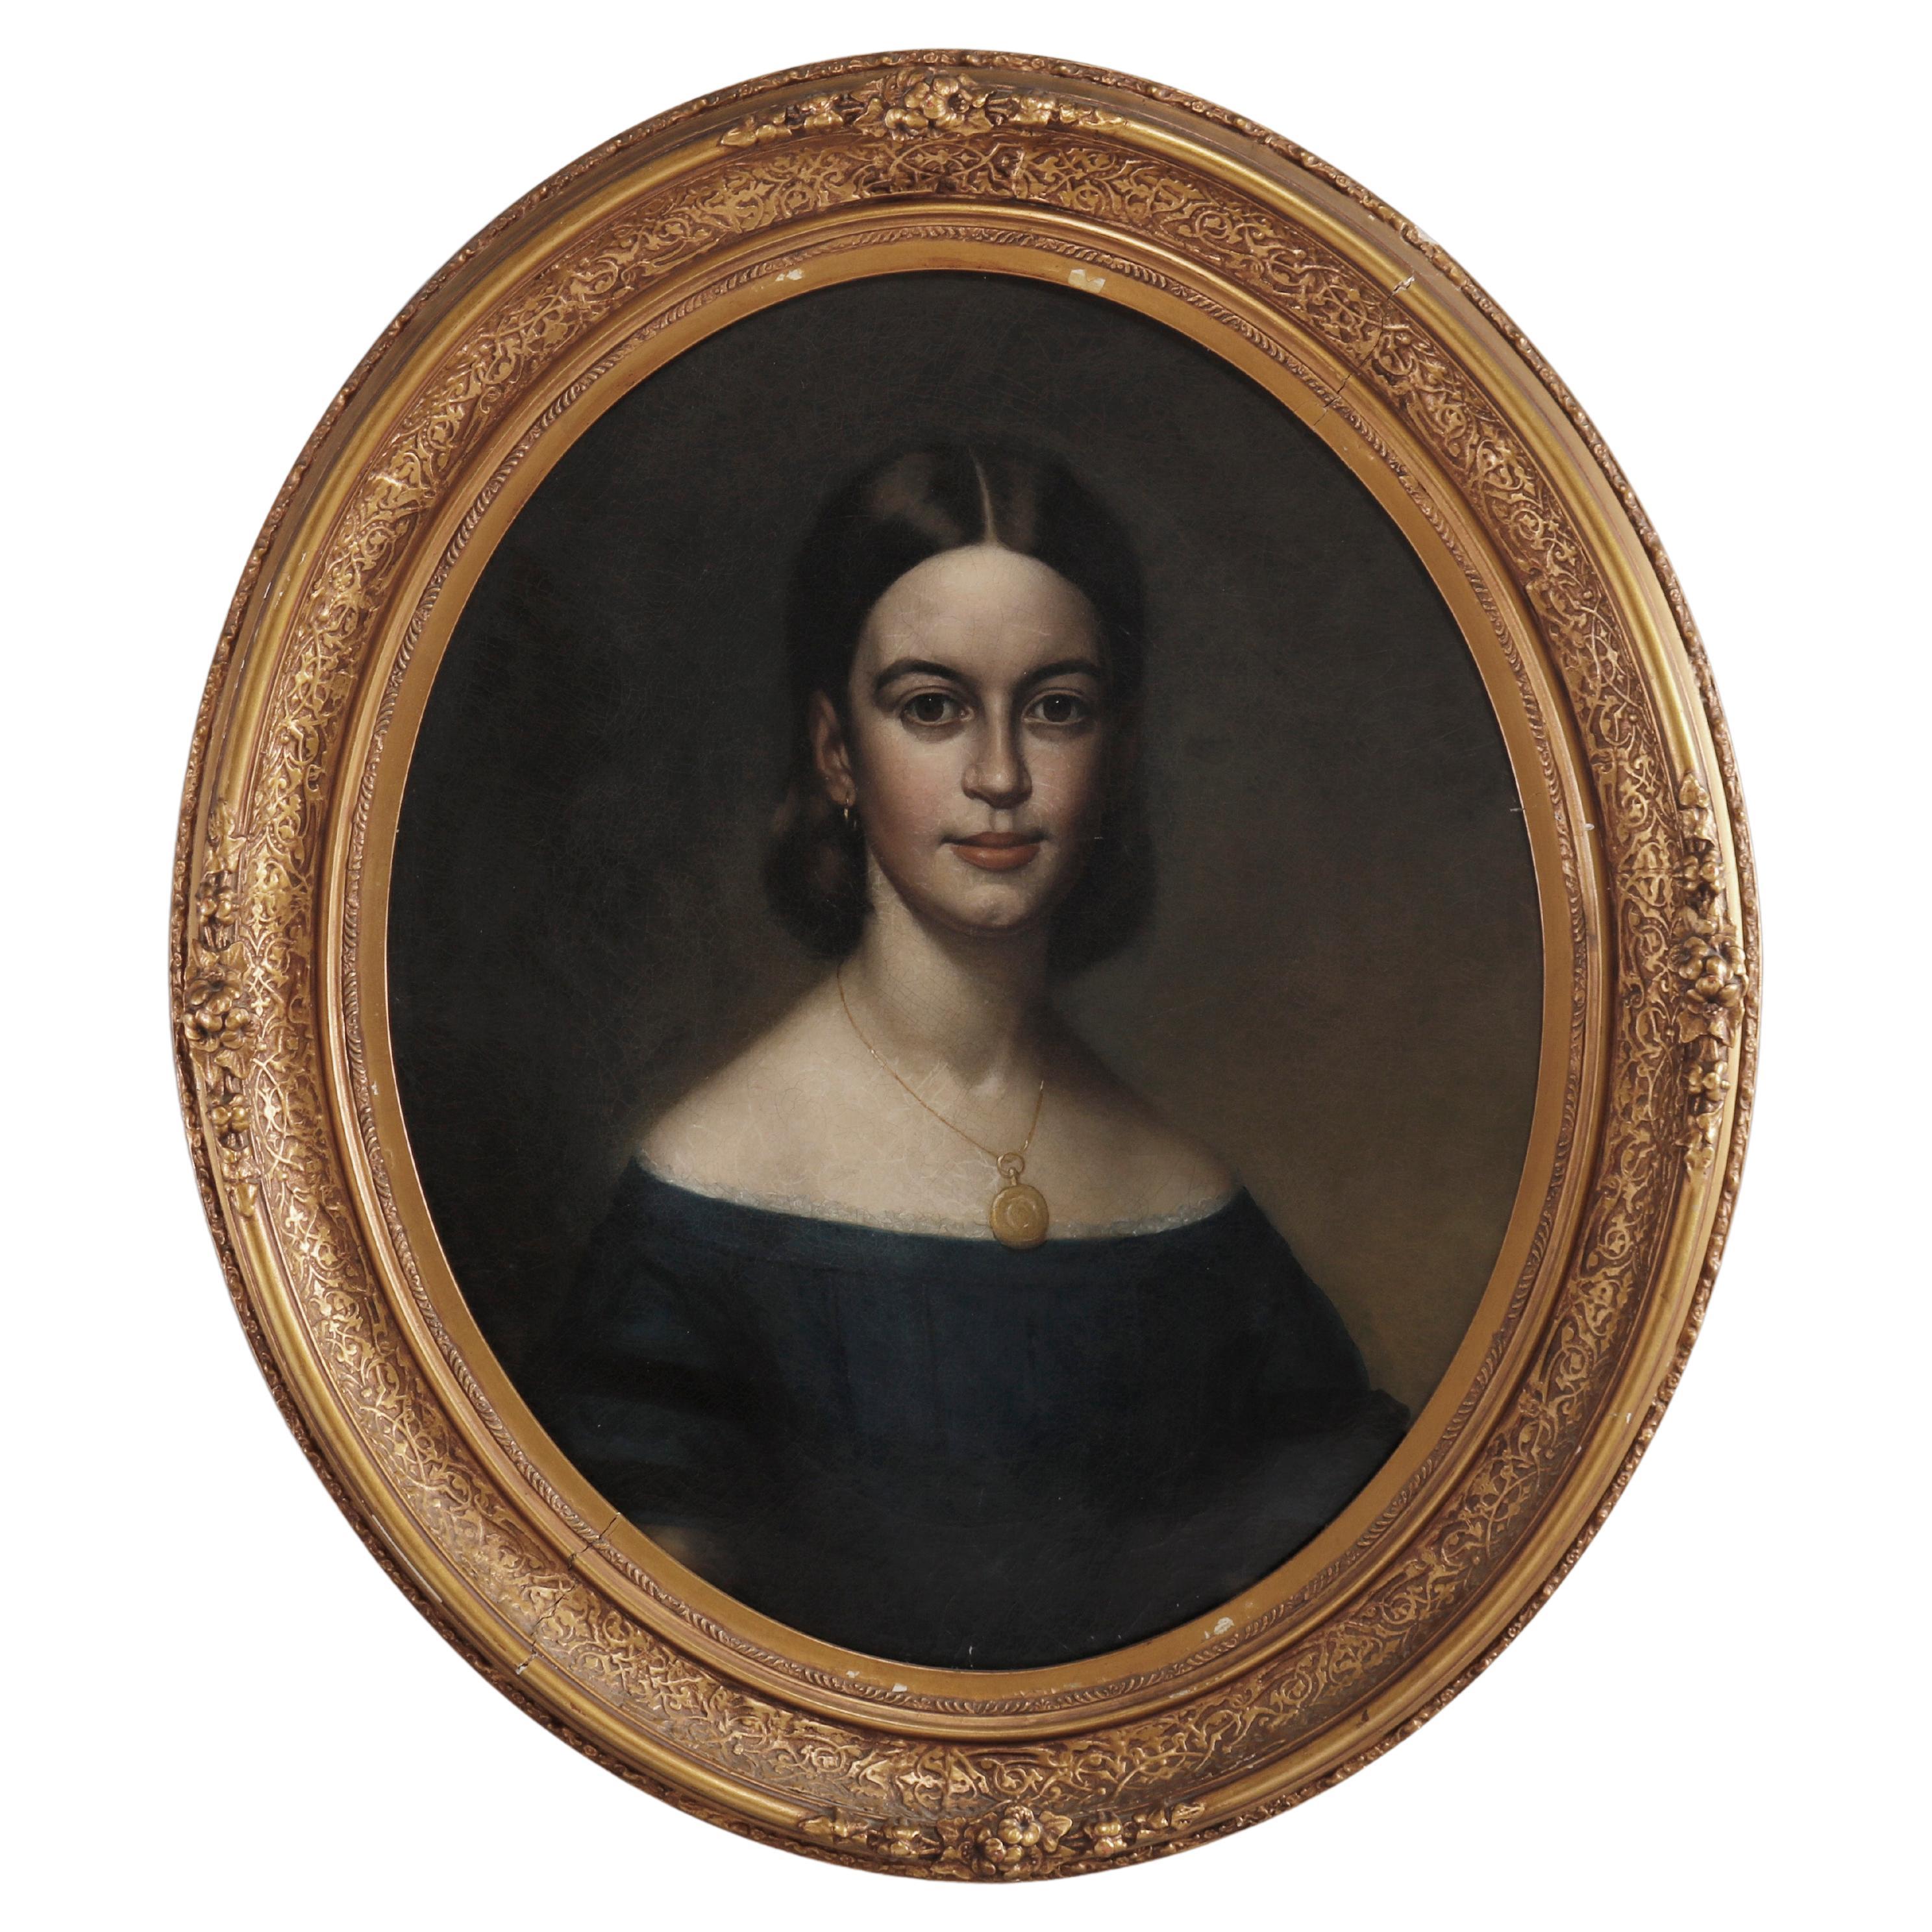 Antique Portrait Painting of a Young Woman by JA Haskell 1860 